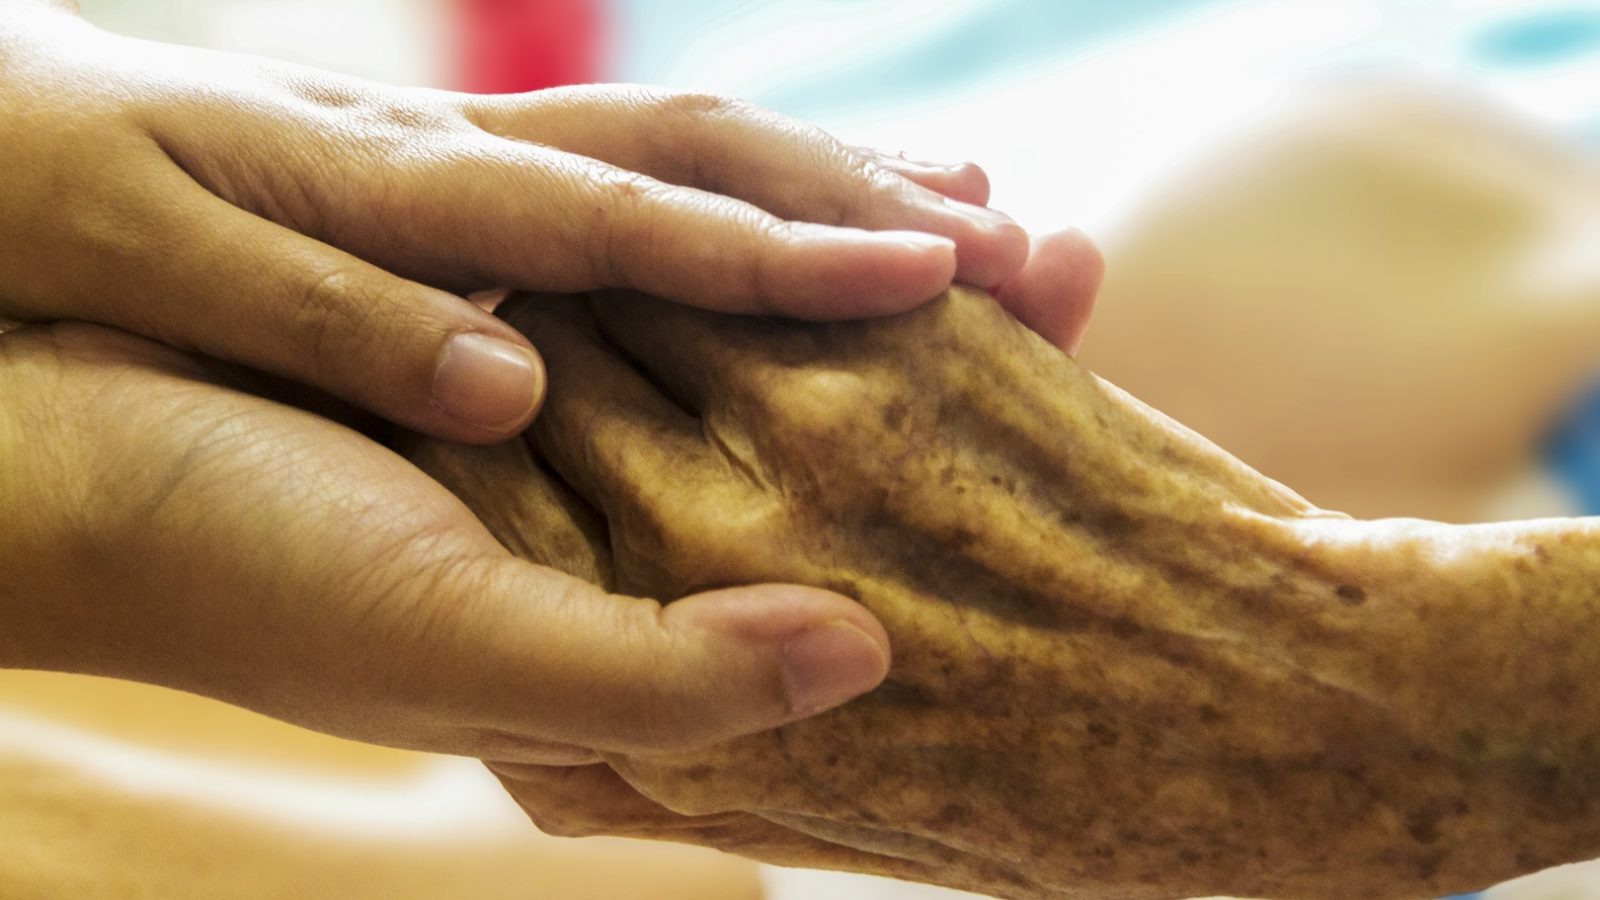 Clasped hands of an older person and a younger person